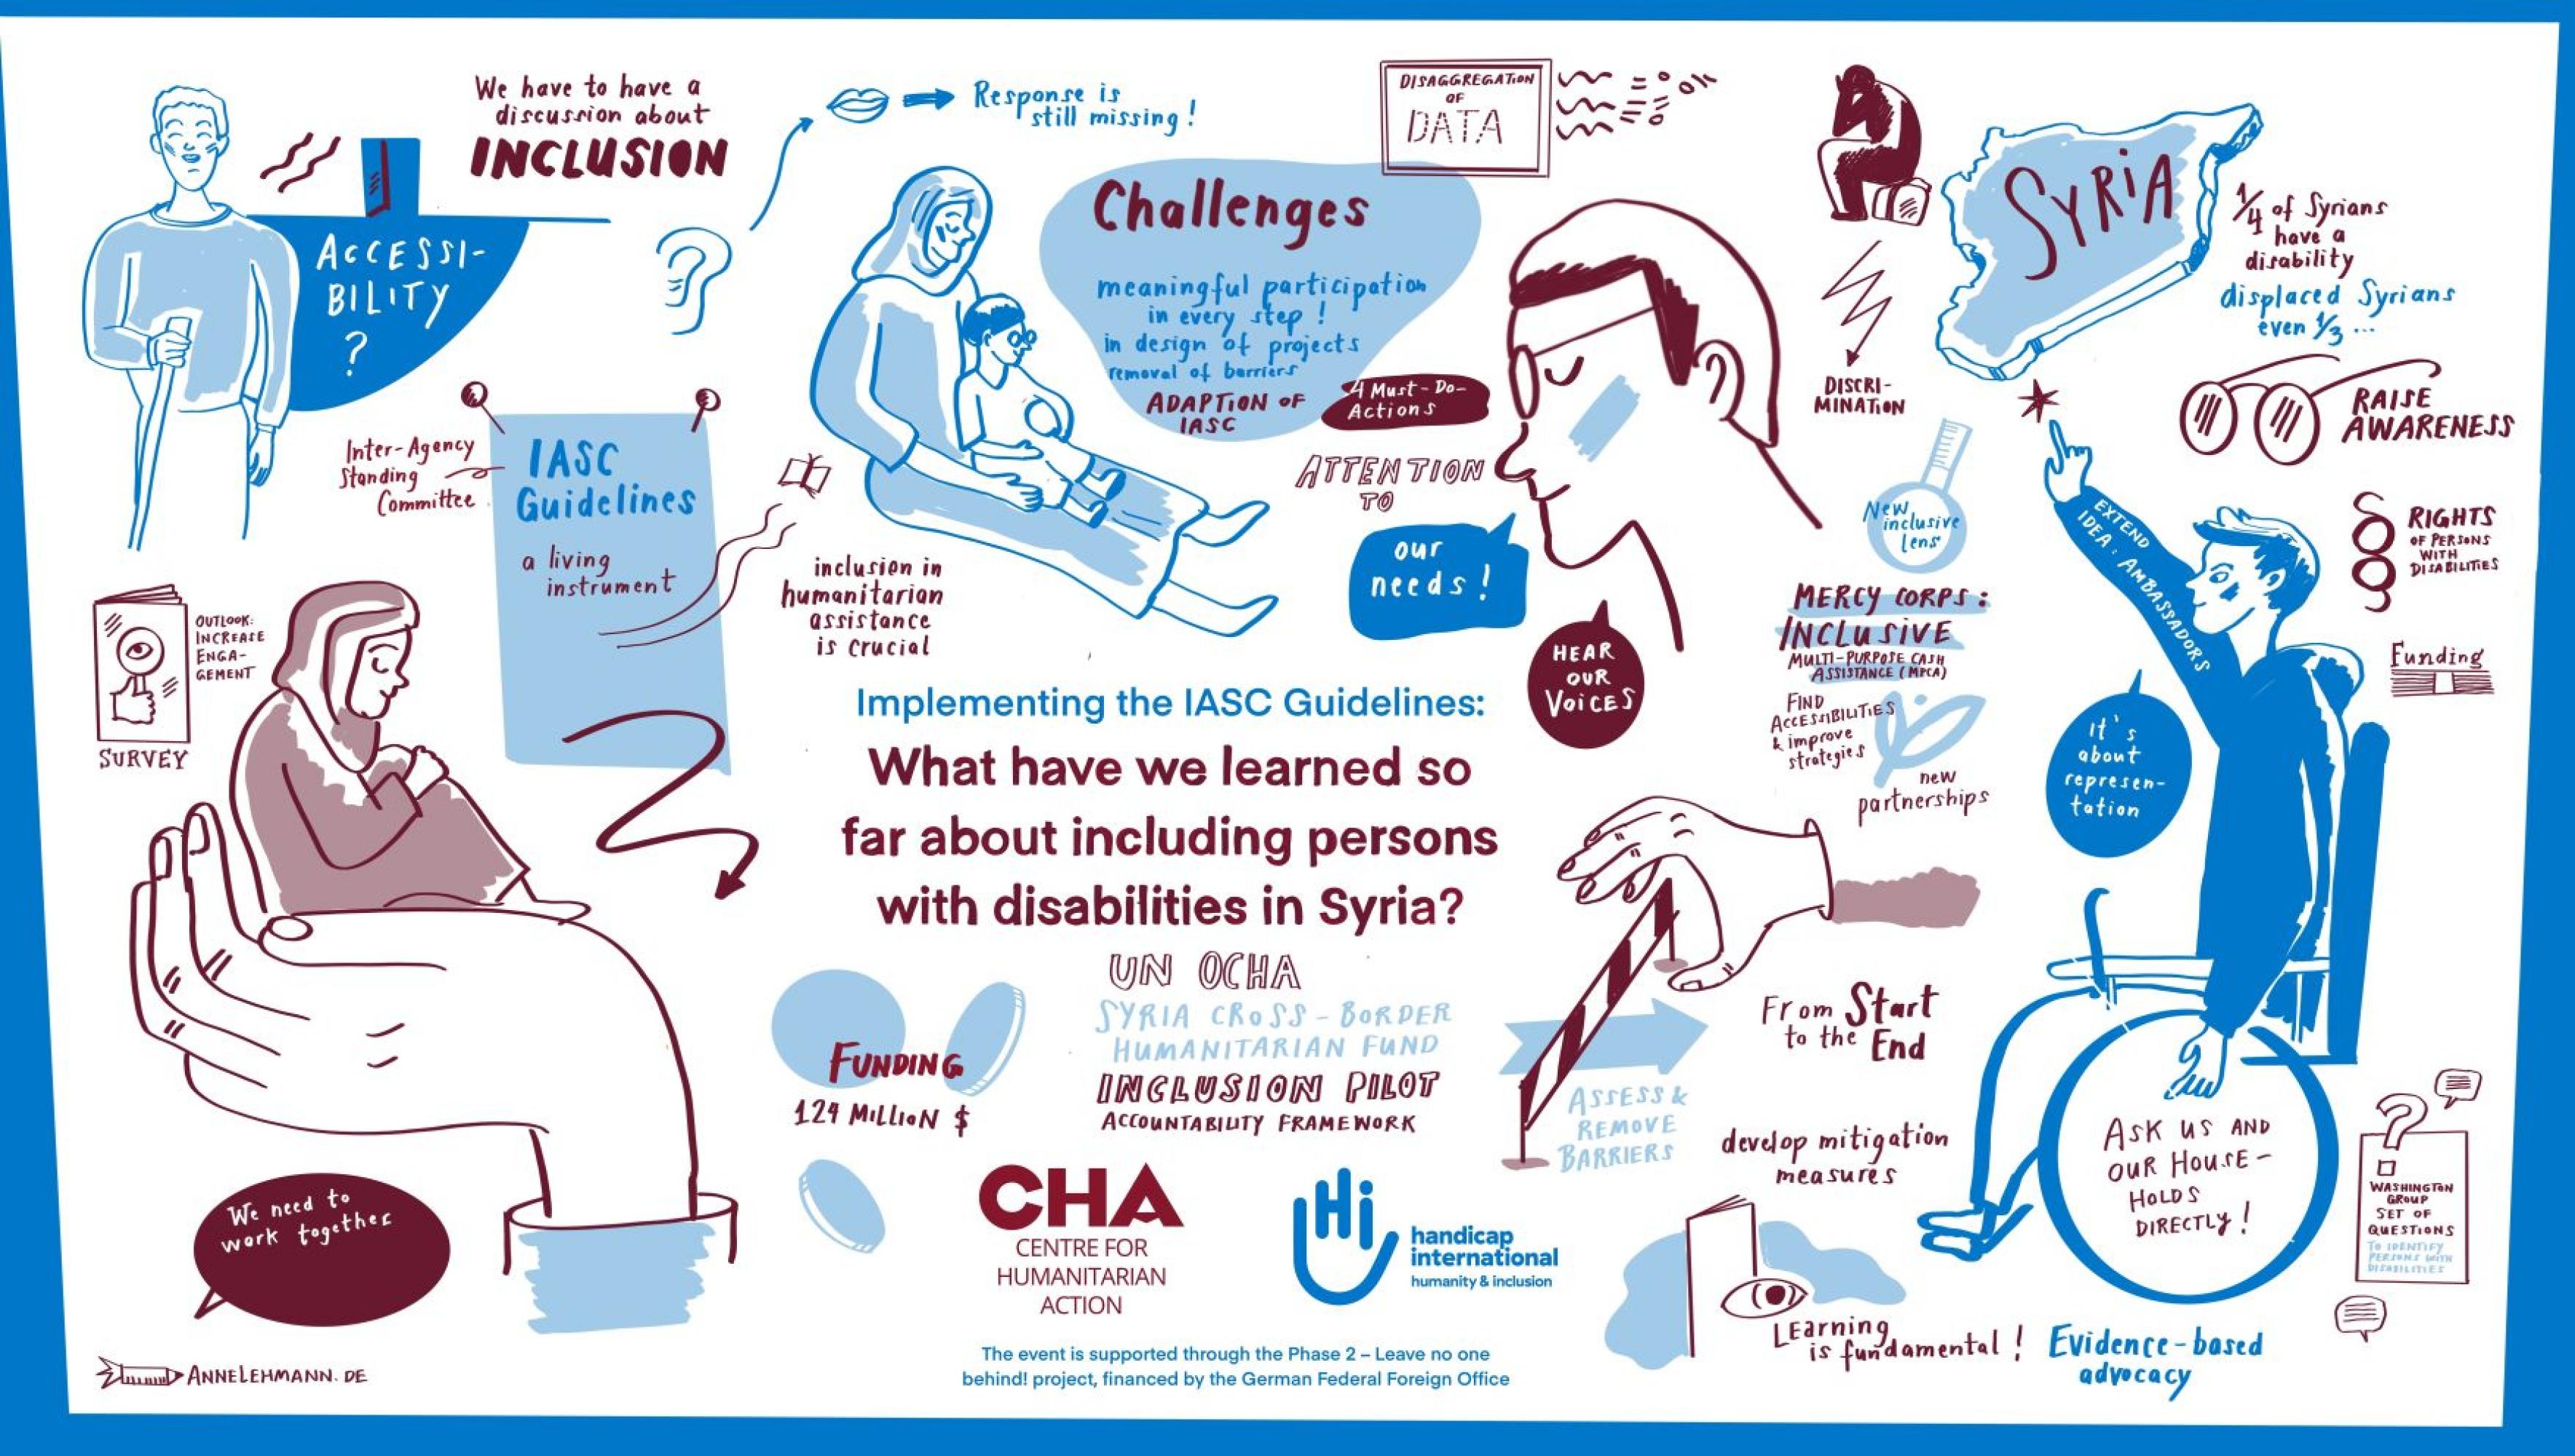 Graphic showing the key messages of the panel discussion: Implementation of the IASC Guidelines on Disability Inclusion in Syria.